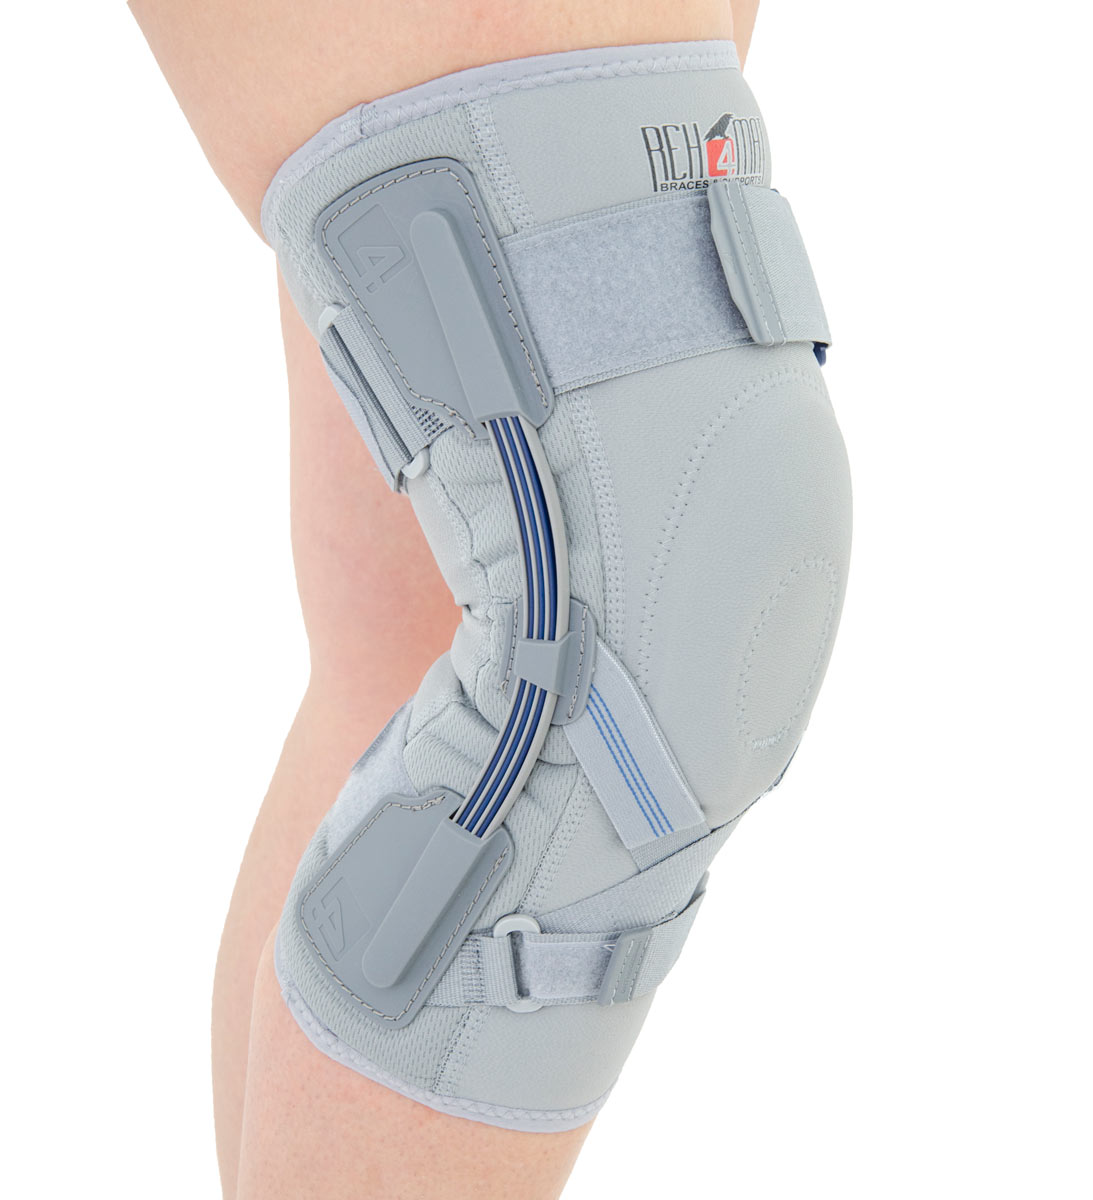 Lower limb support EB-SK/A GREY  Reh4Mat – lower limb orthosis and braces  - Manufacturer of modern orthopaedic devices